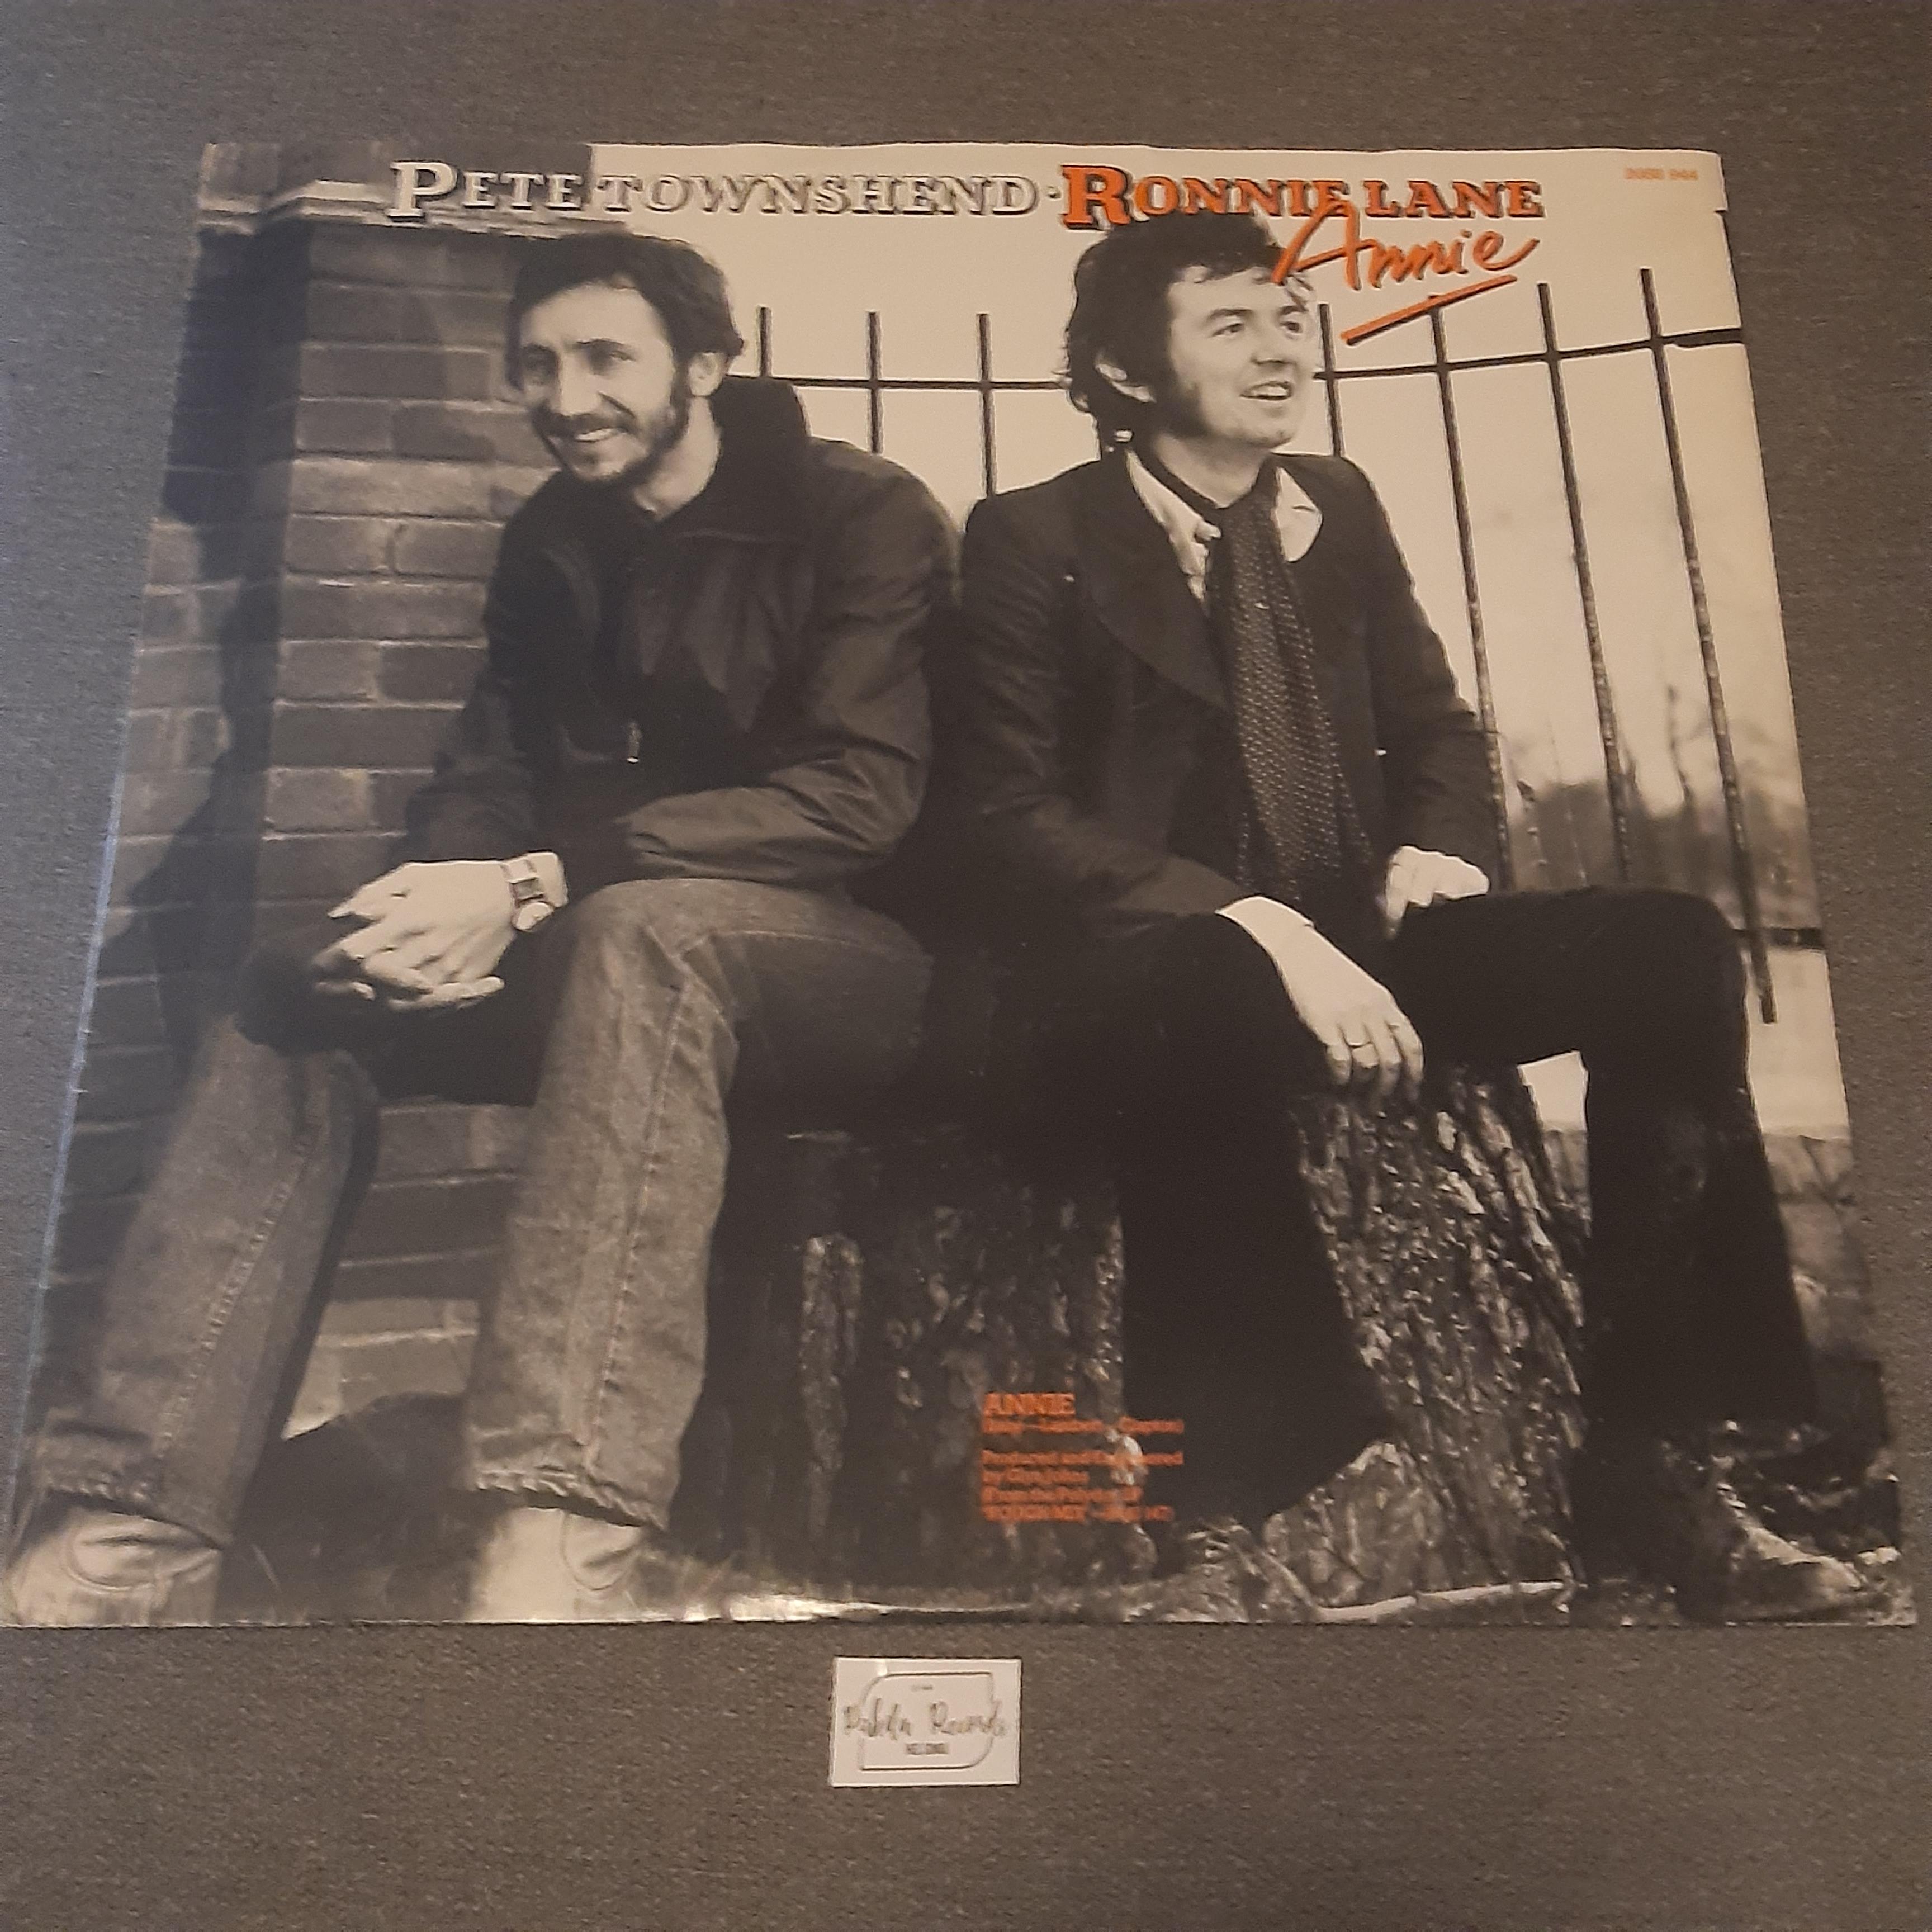 Pete Townshend, Ronnie Lane - Street In The City / Annie - Single 12" (käytetty)